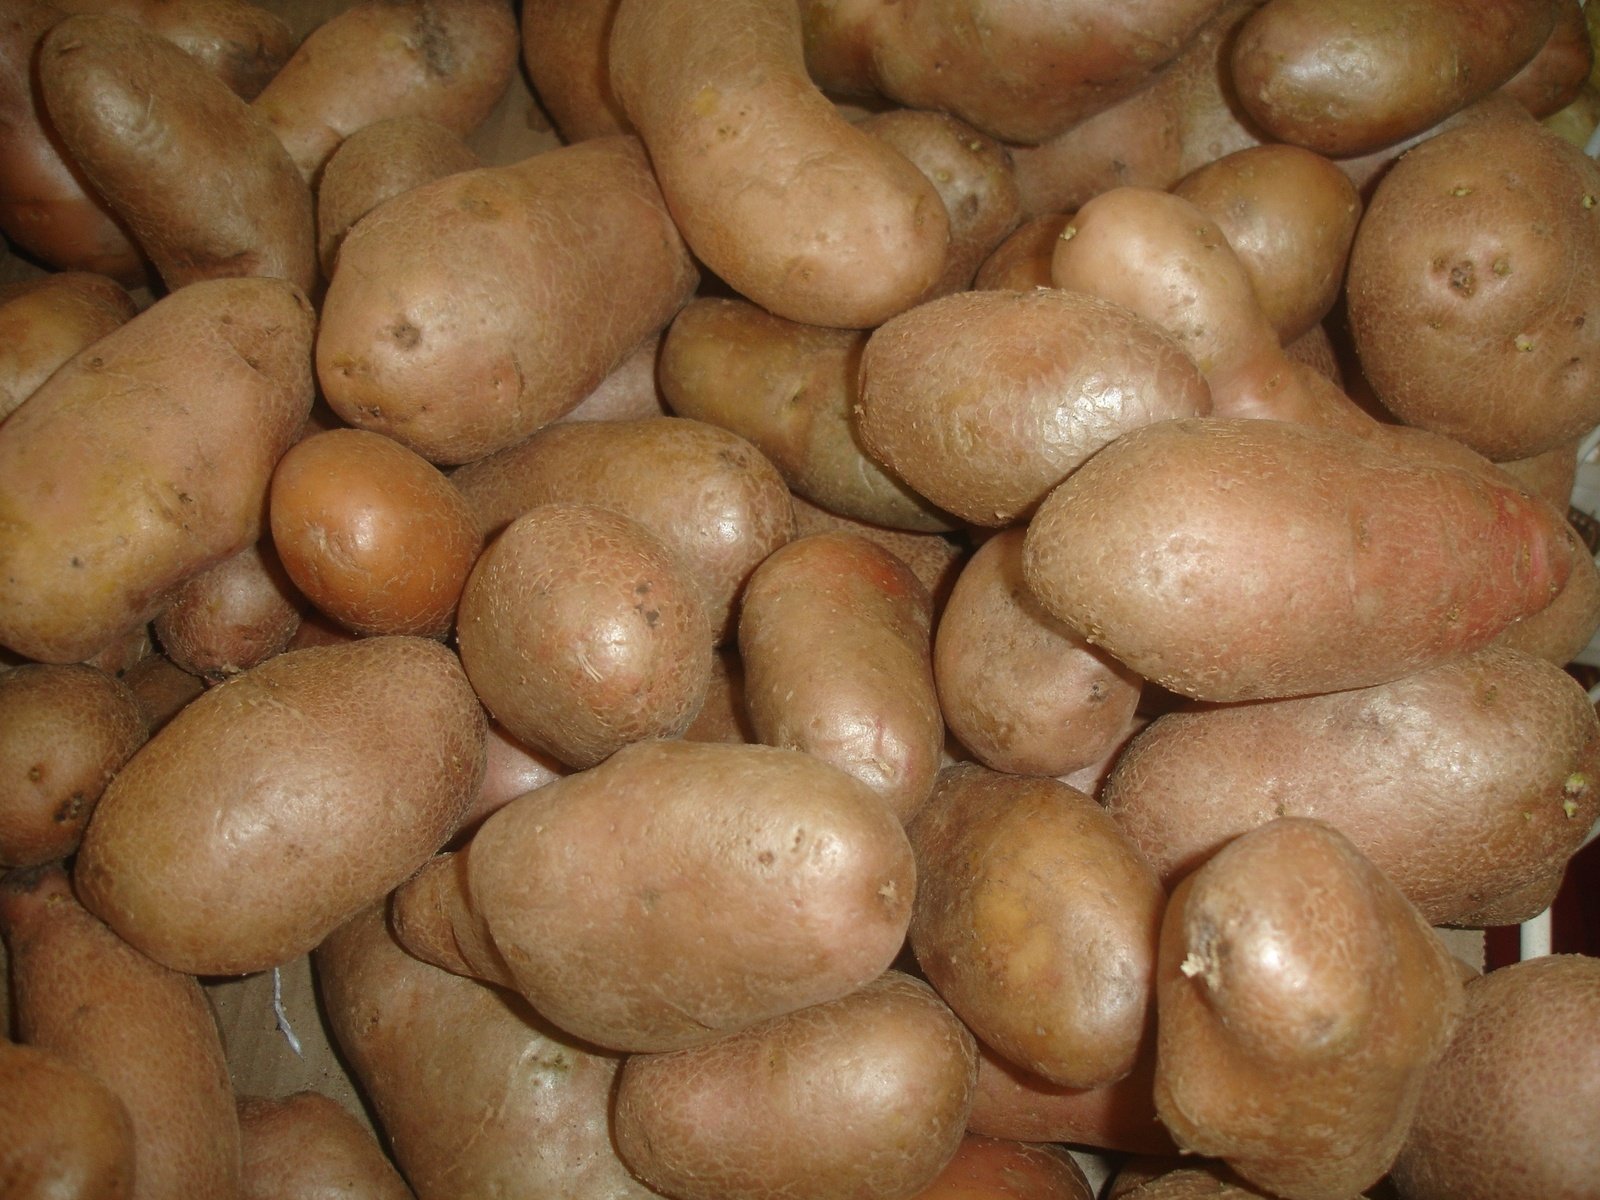 a pile of potato's with one yellow substance in the center